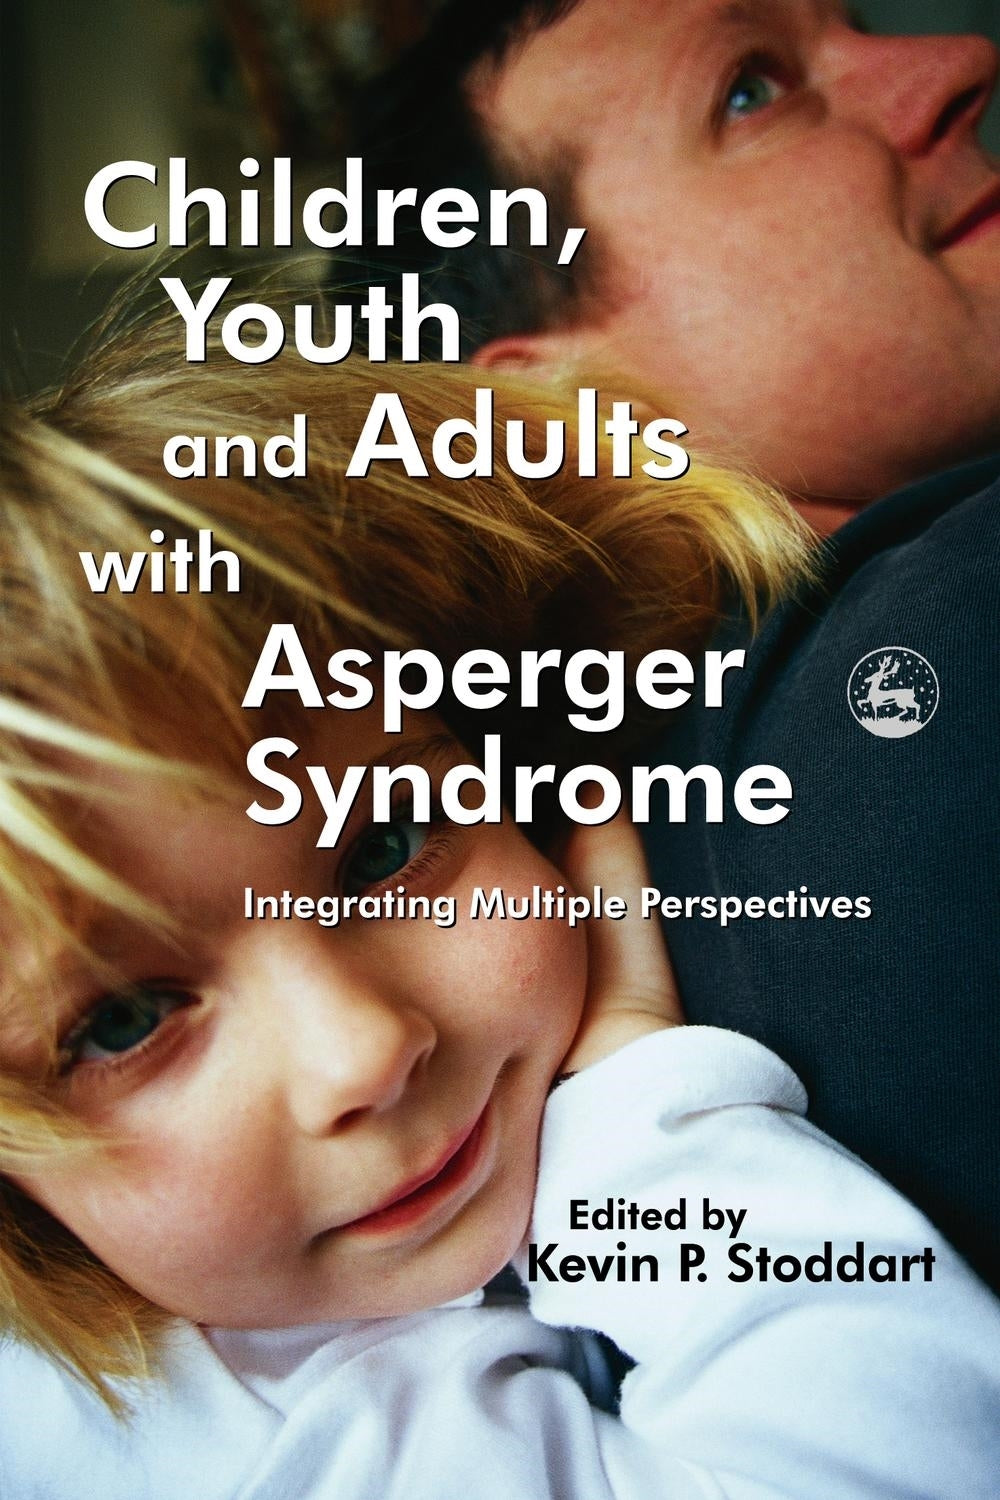 Children, Youth and Adults with Asperger Syndrome by Kevin Stoddart